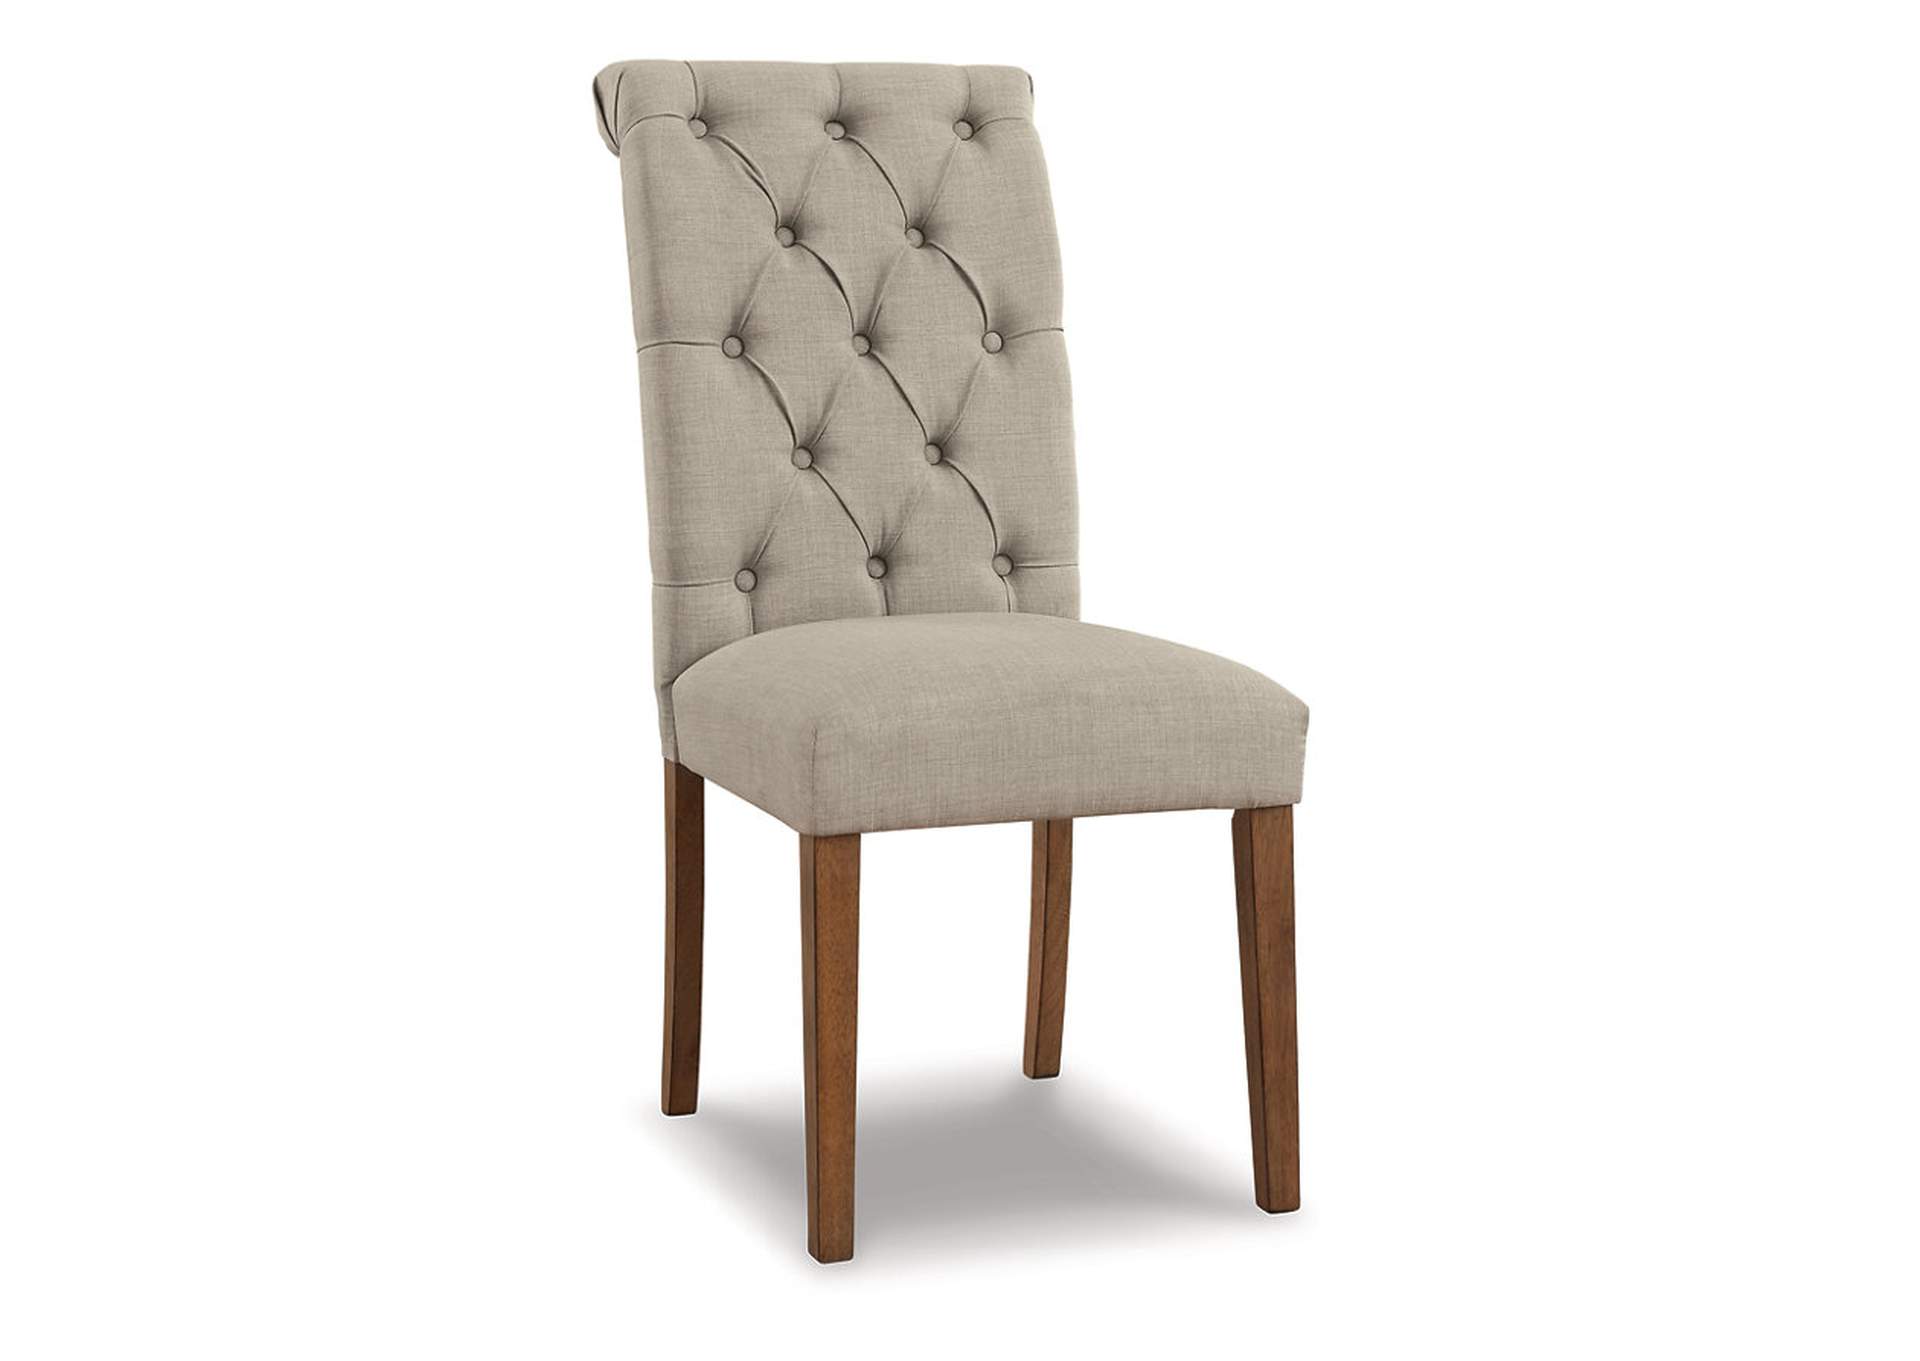 Harvina Dining Chair,Signature Design By Ashley